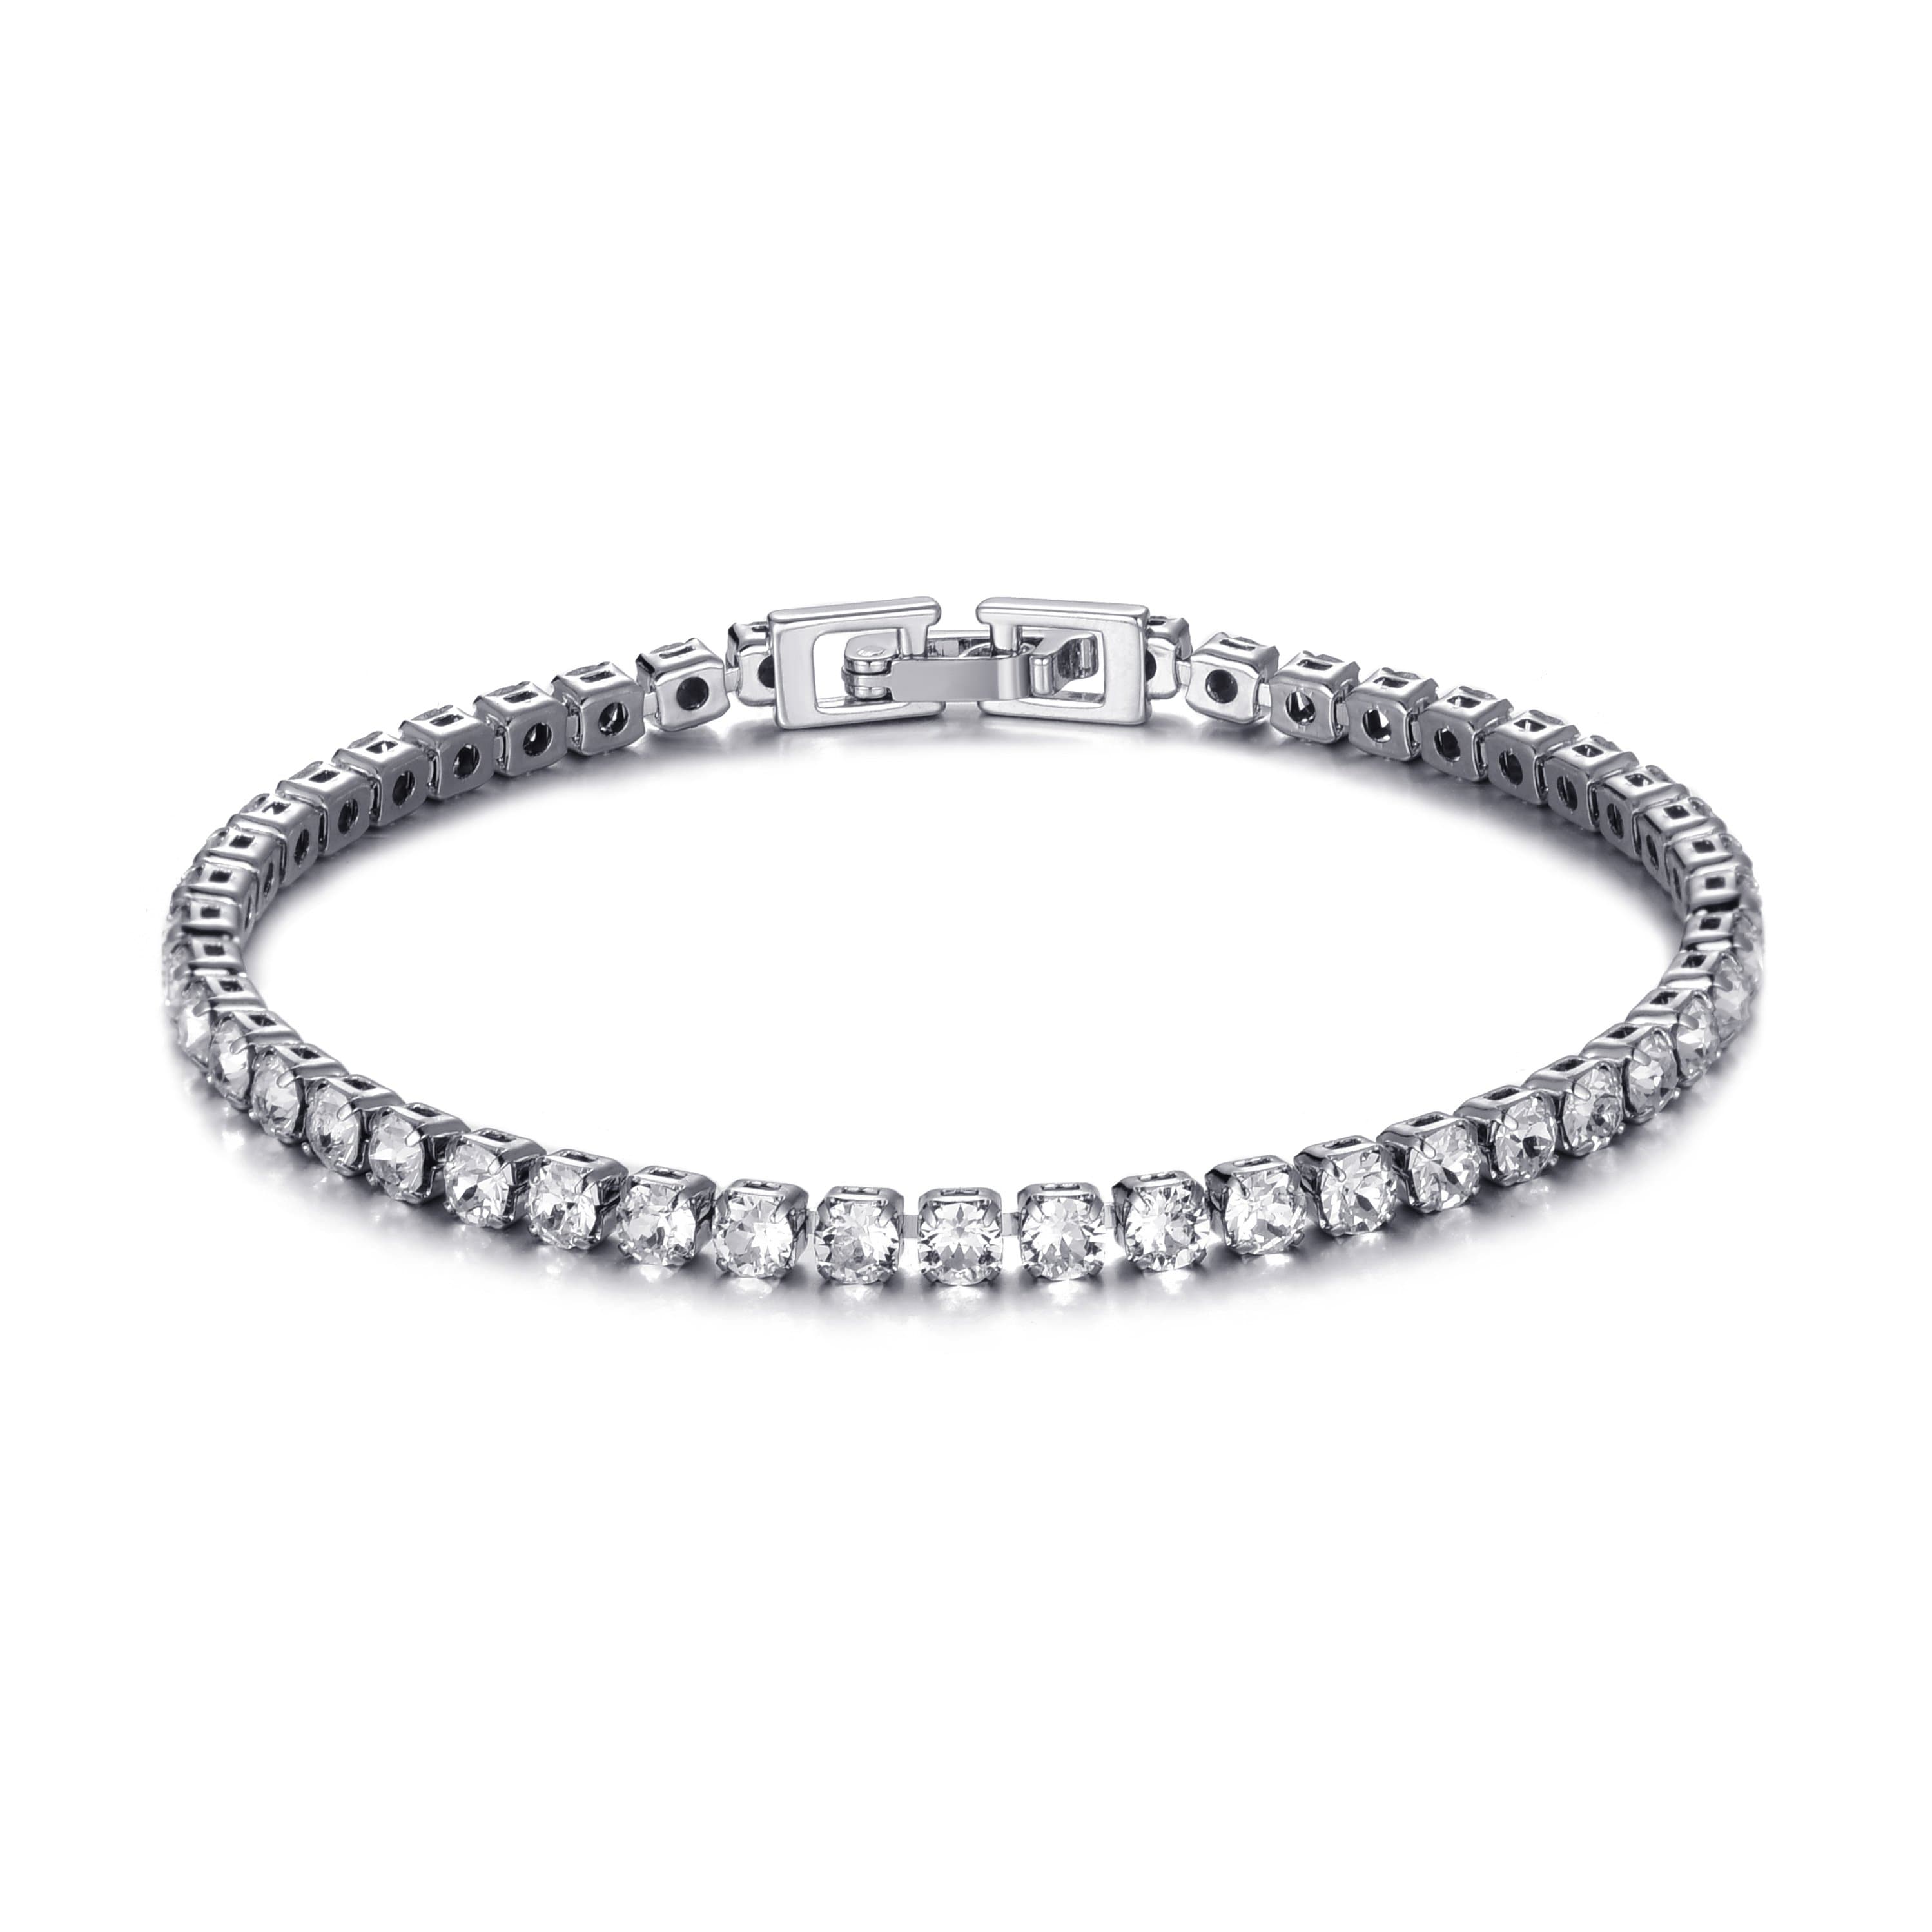 Silver Plated 3mm Tennis Bracelet Created with Zircondia® Crystals by Philip Jones Jewellery